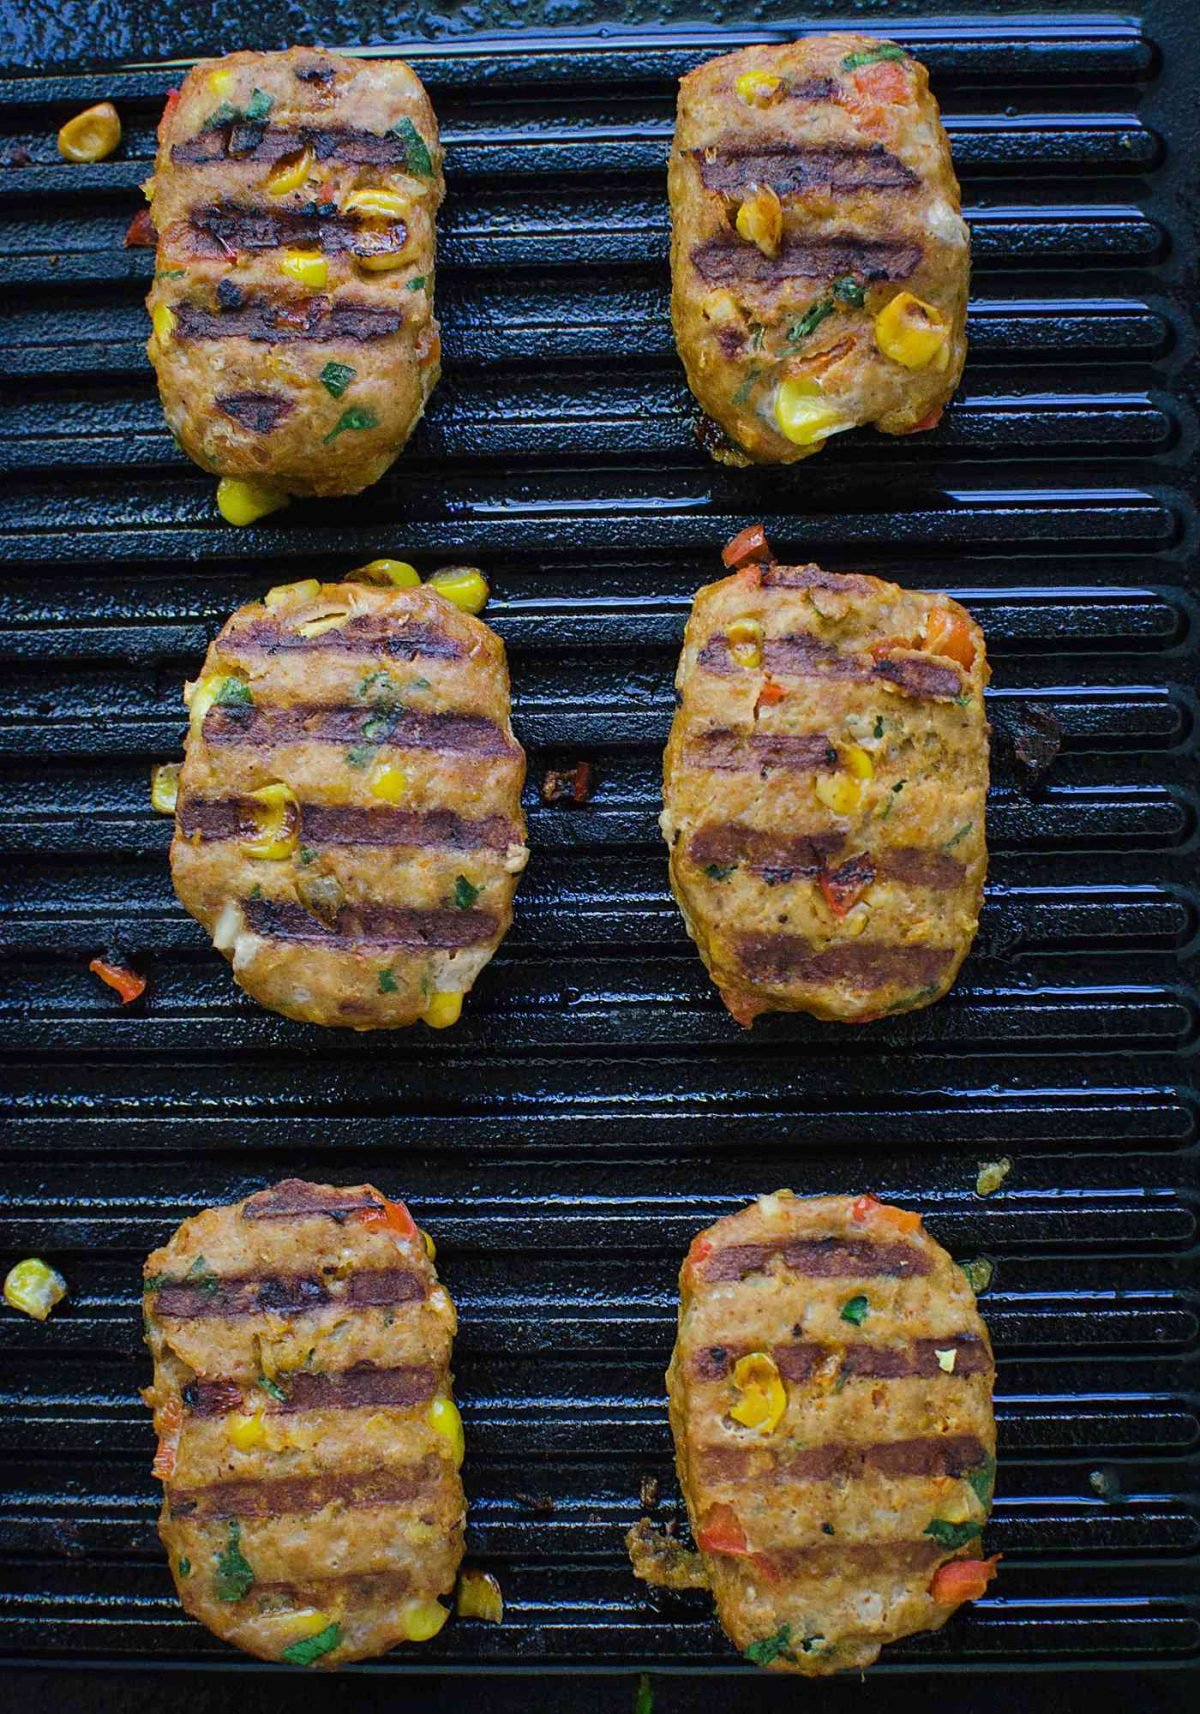 Image with mini turkey meatloaves on the grill while cooking.